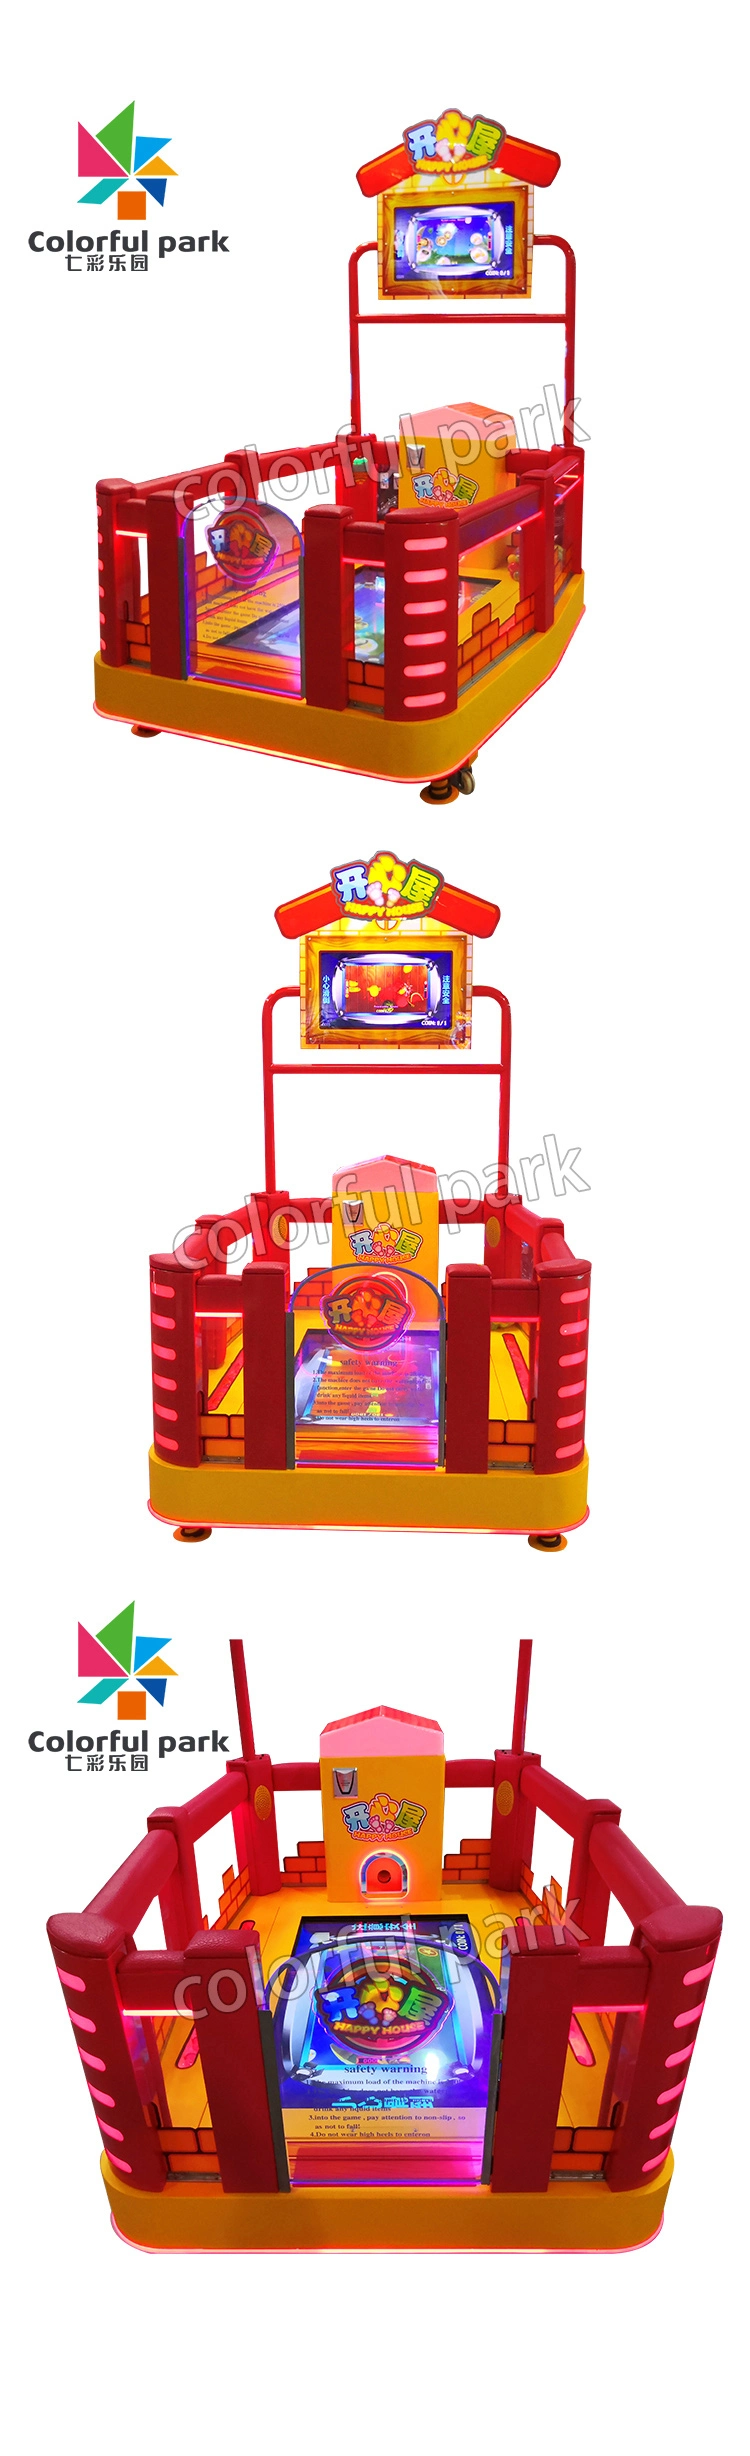 Colorful Park Hit Beans Touch Screen Game Happy Room Game Machine Video Arcade Game